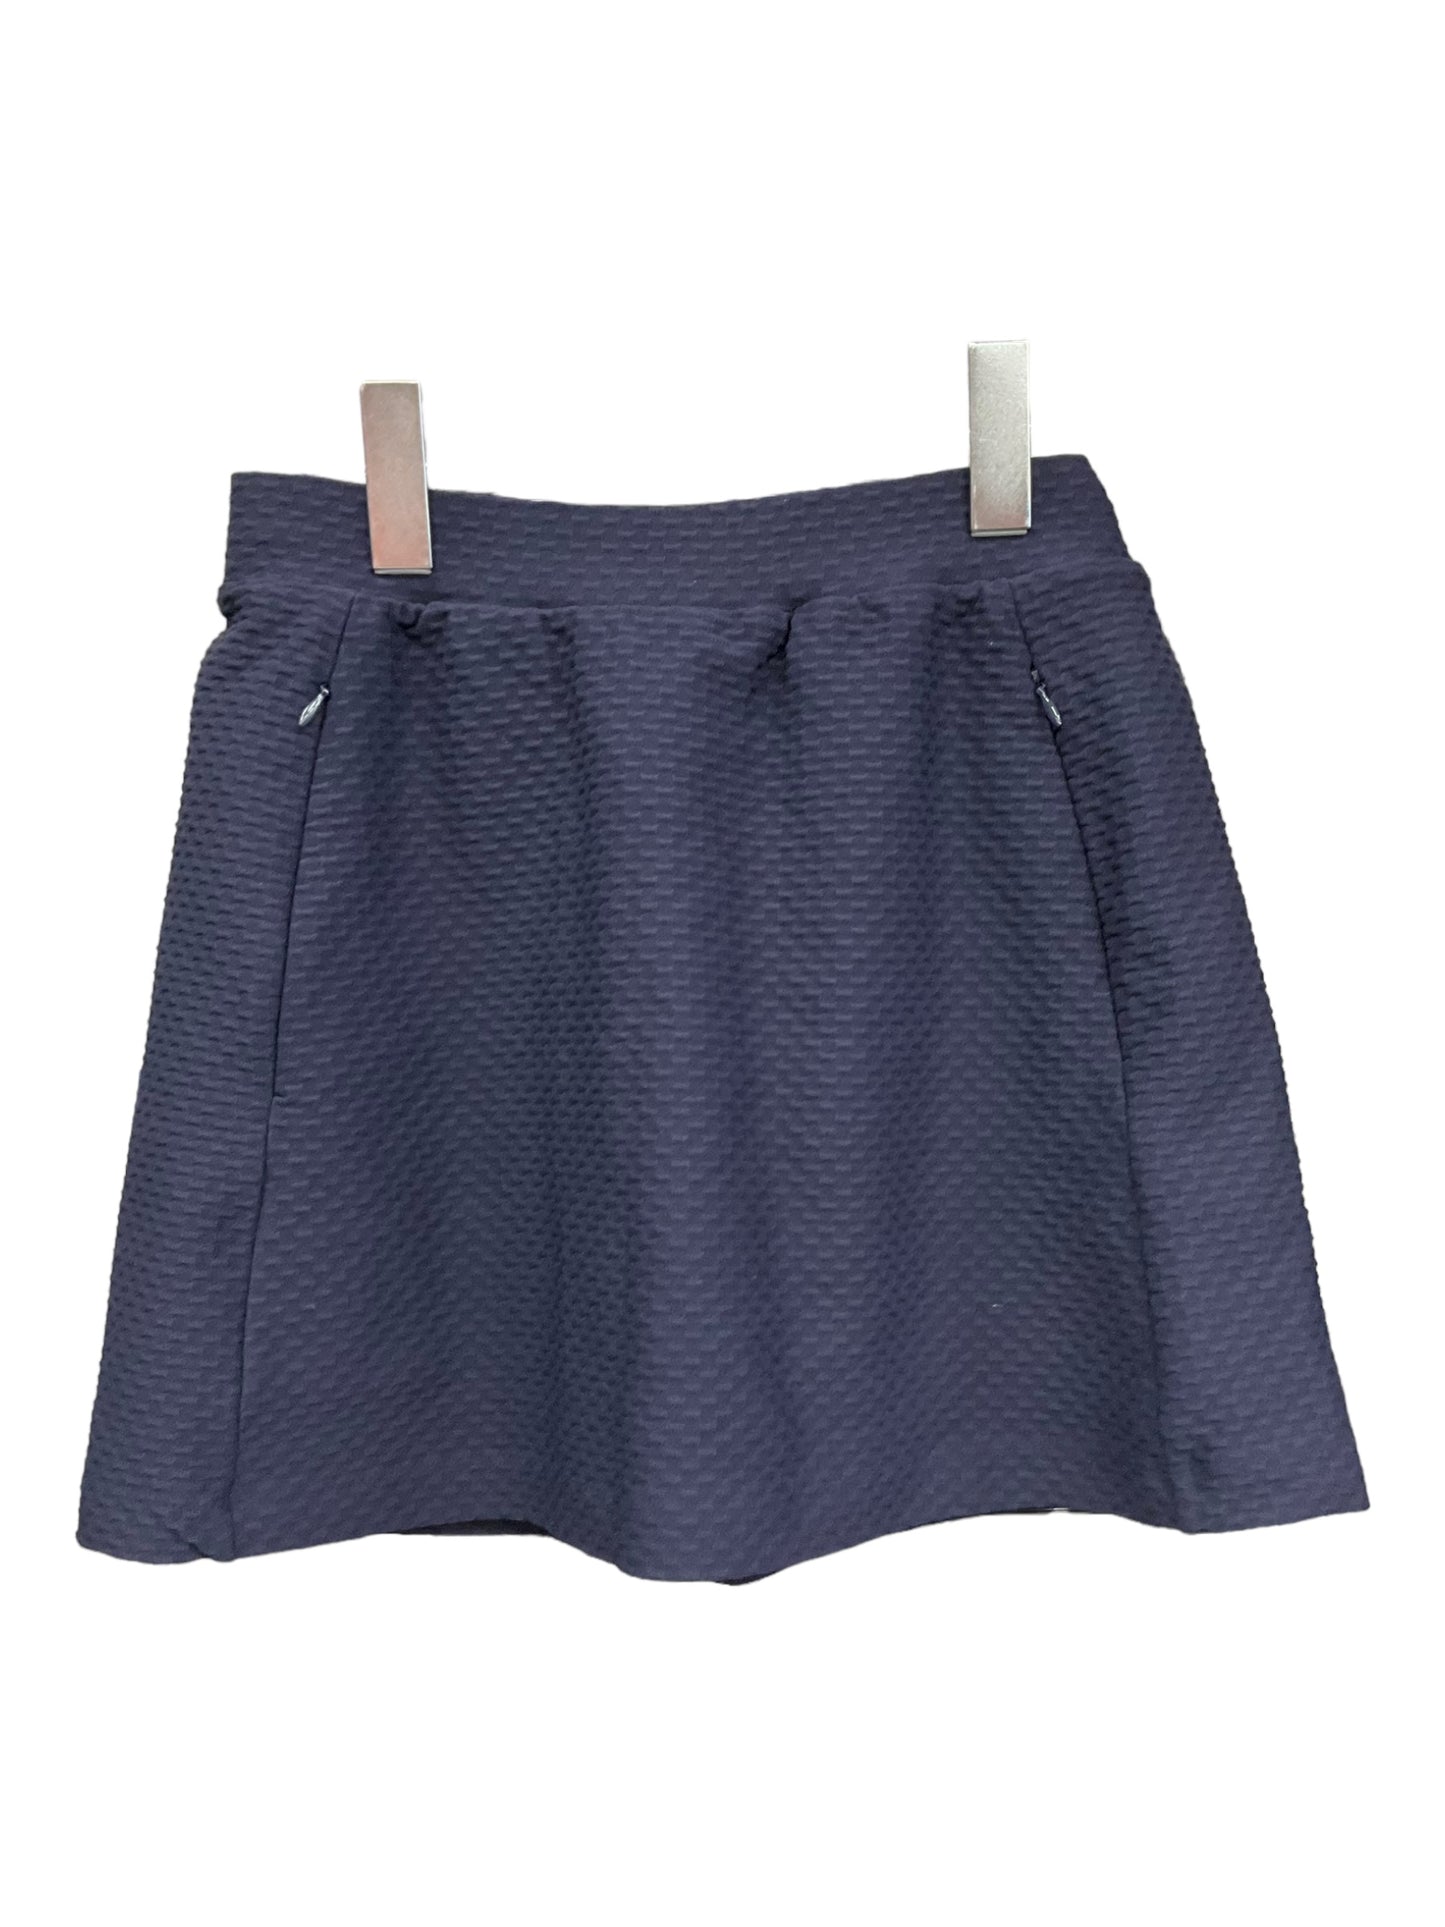 Athletic Skirt Skort By Tail  Size: Xs